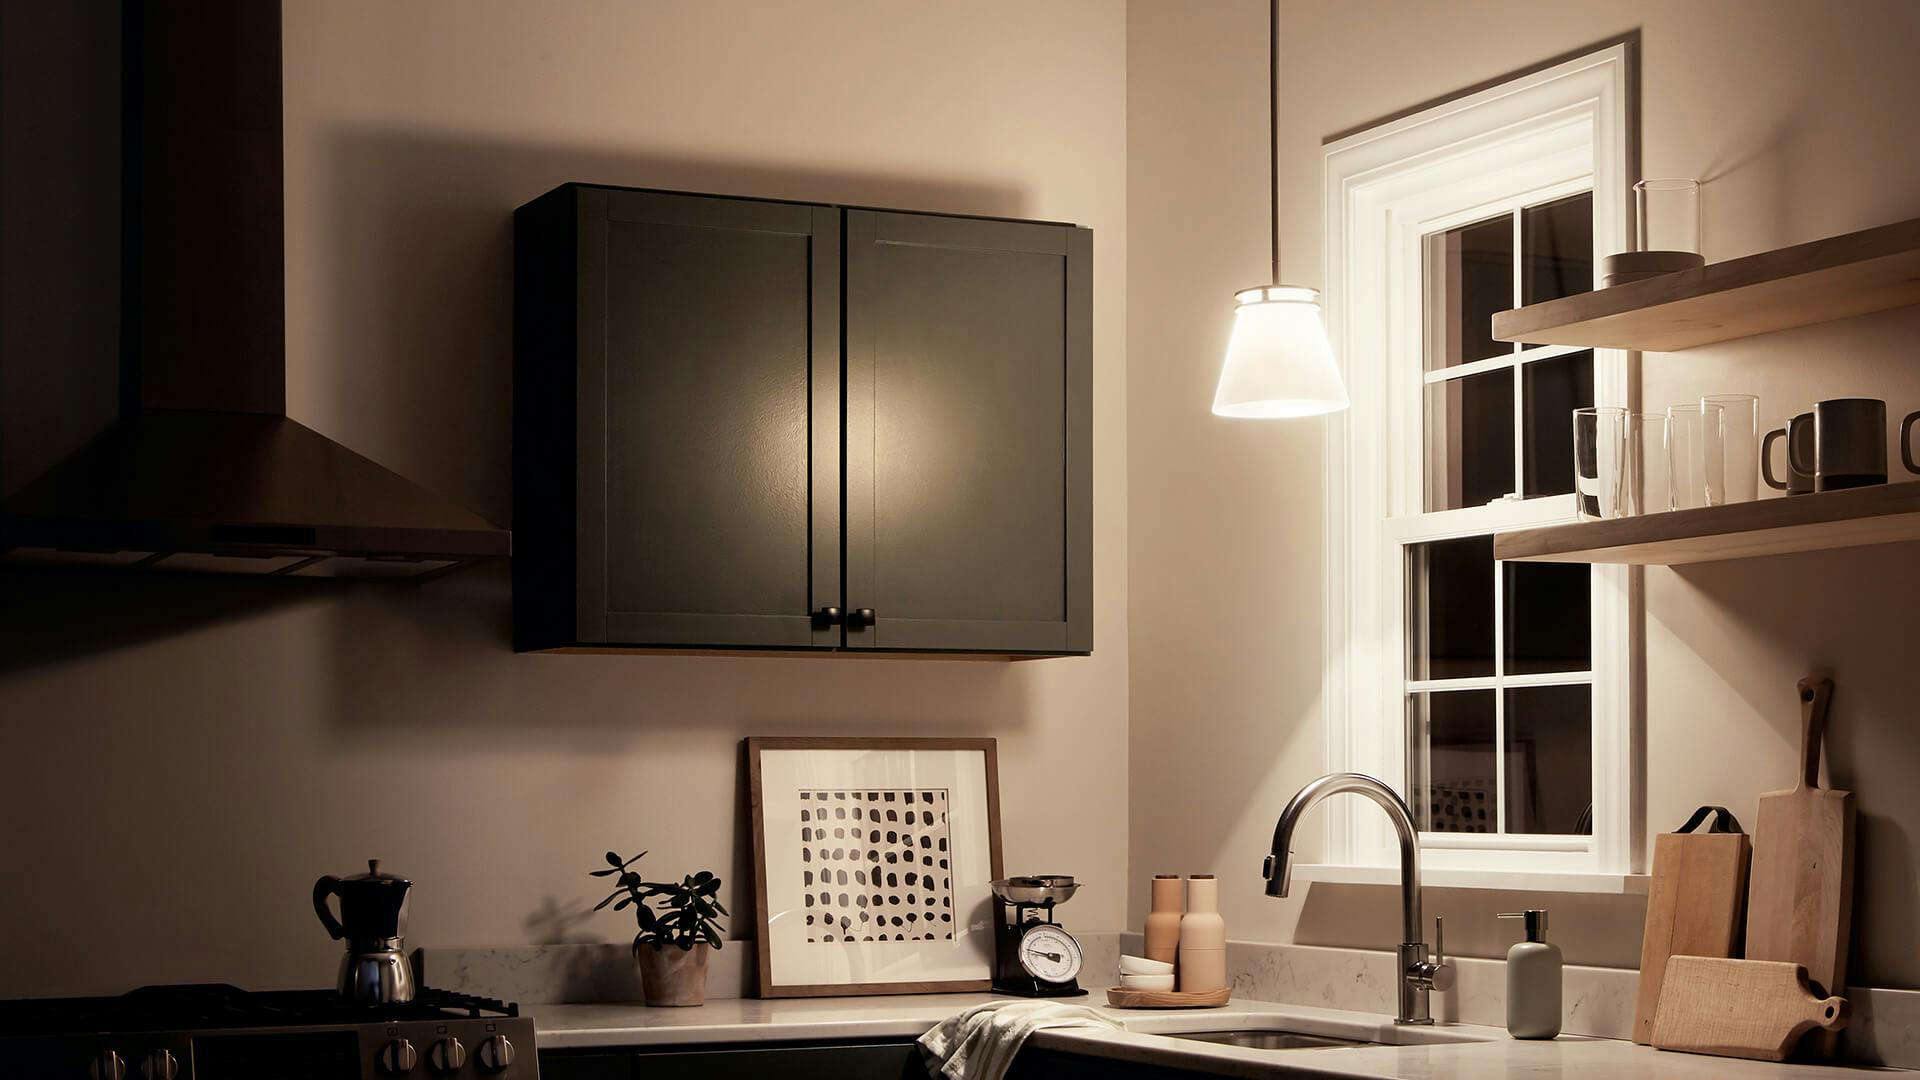 Kitchen corner at nighttime with a single Hendrik pendant glowing above the sink in front of the window